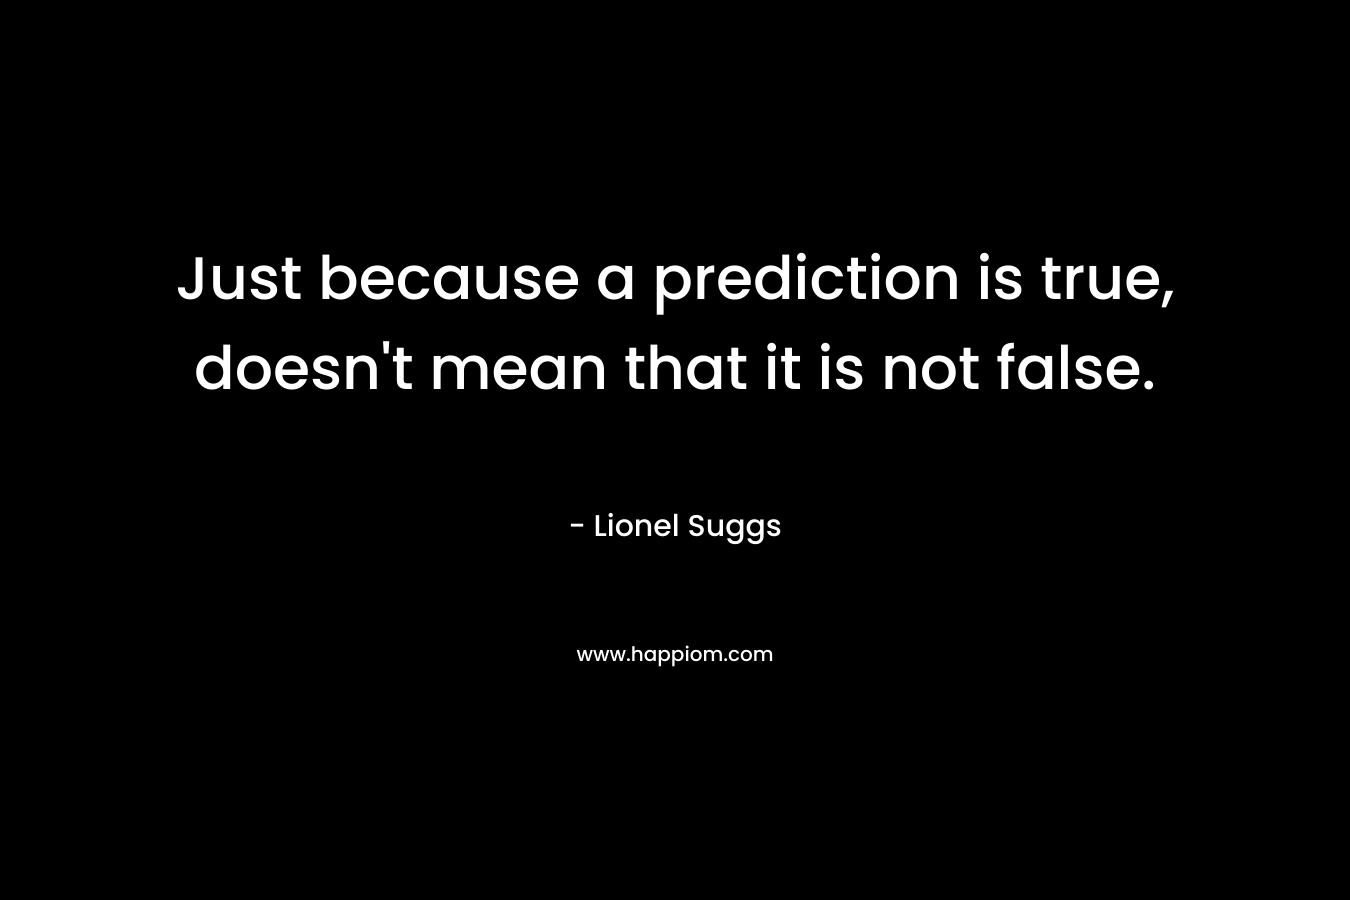 Just because a prediction is true, doesn't mean that it is not false.